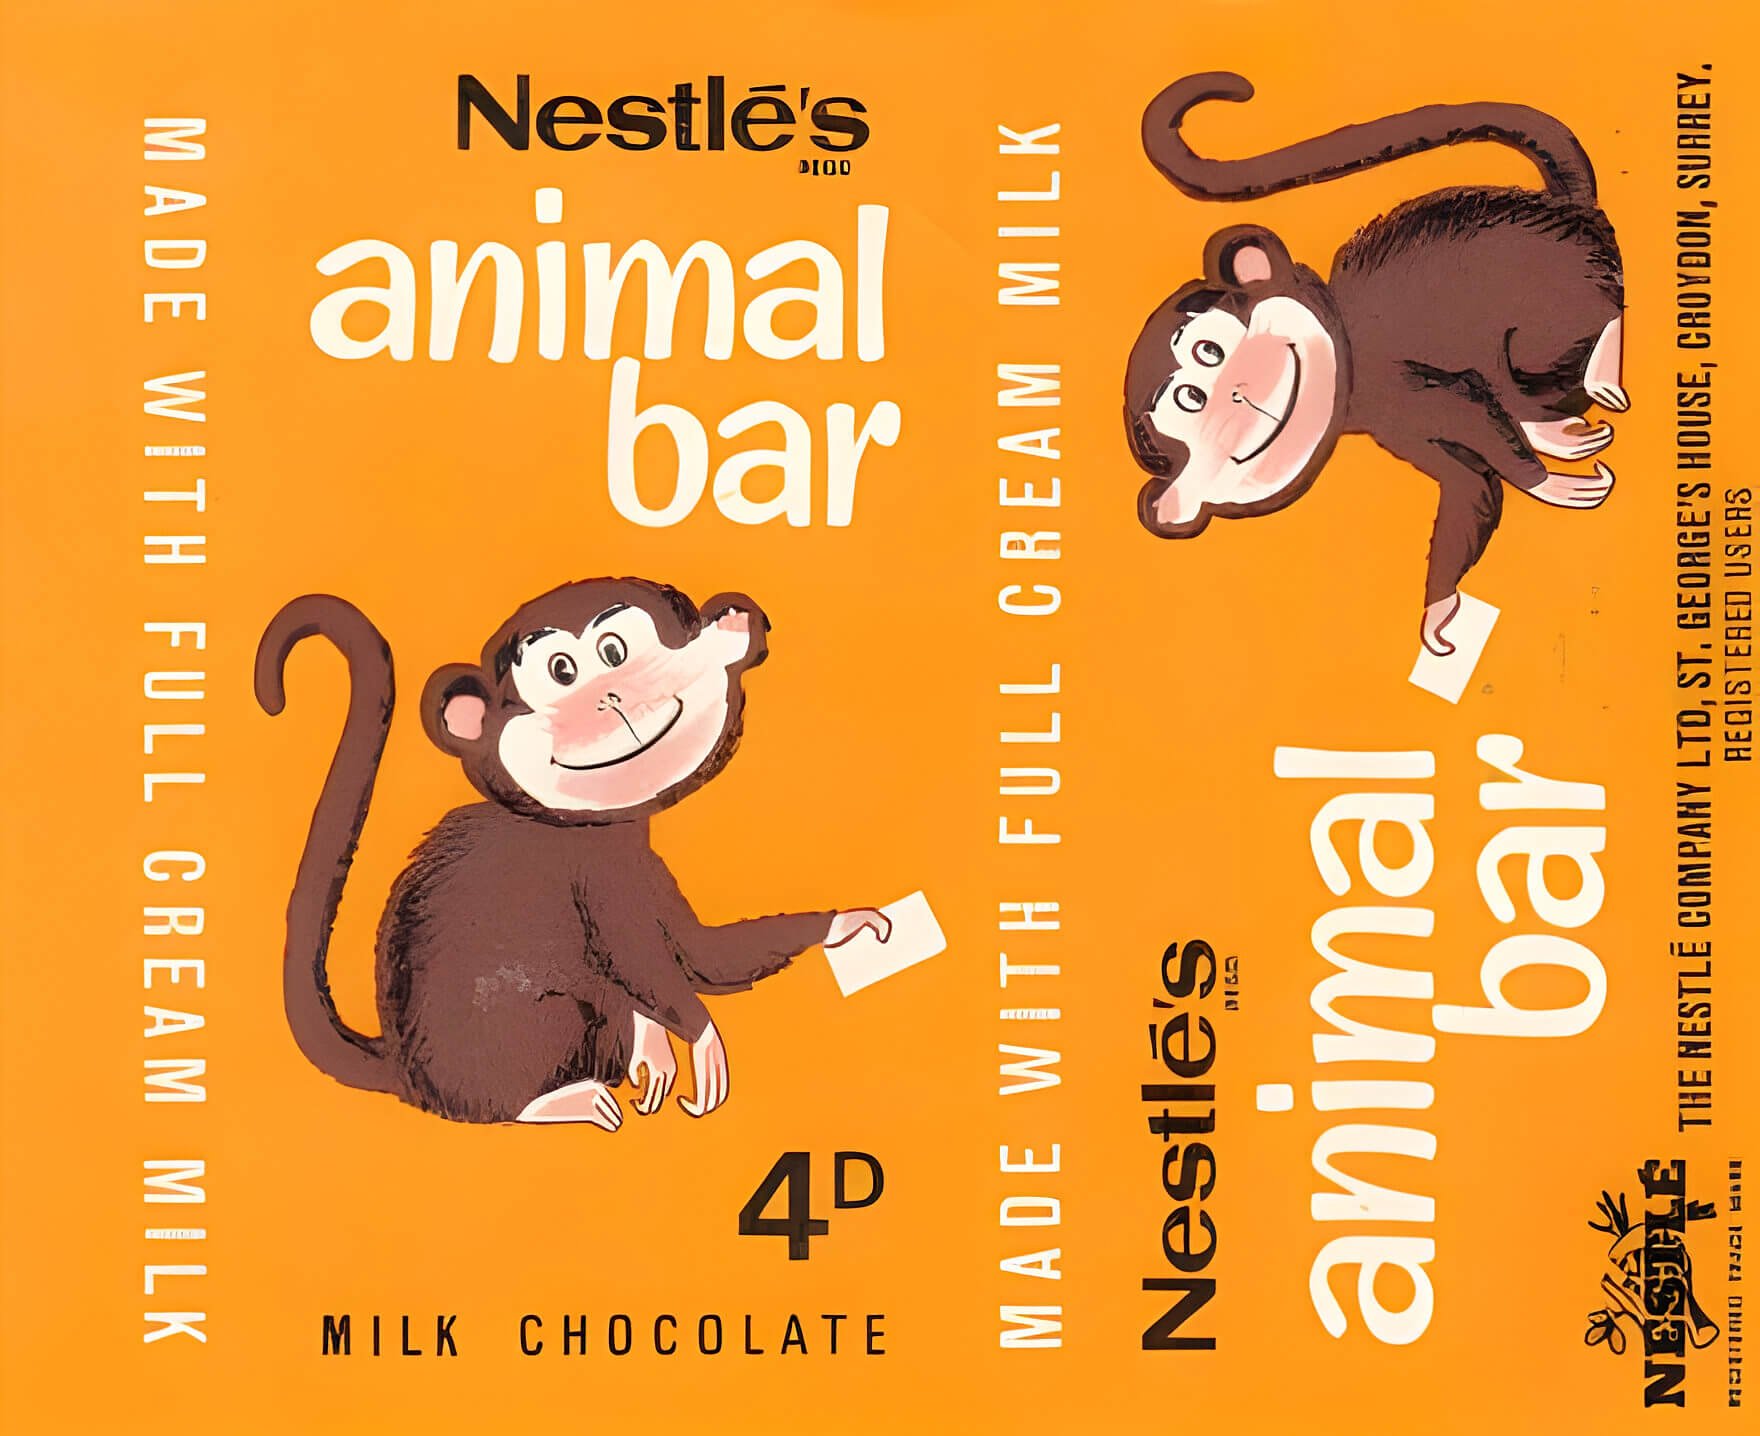 Orange Nestle Animal Bar wrapper featuring a monkey, from 1960s, price 4D.